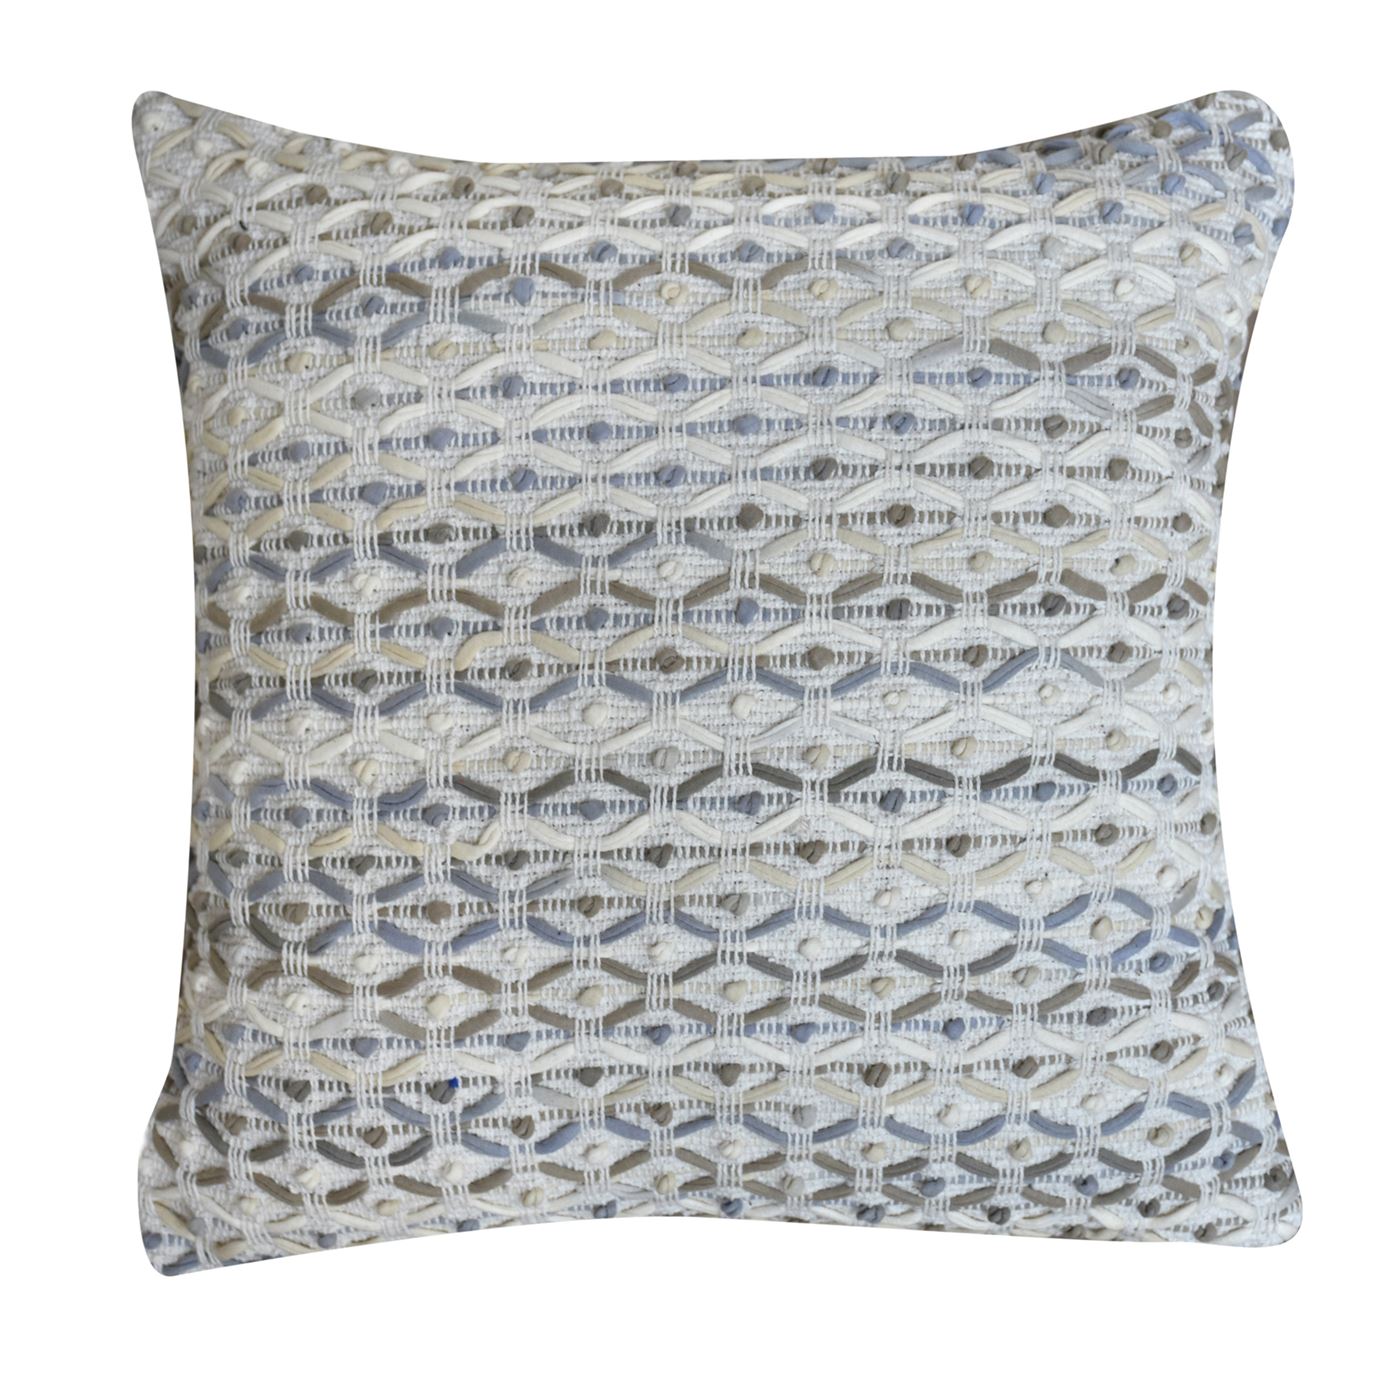 Rosita Pillow, Cotton, Natural White, Blue, Grey, Pitloom, All Loop